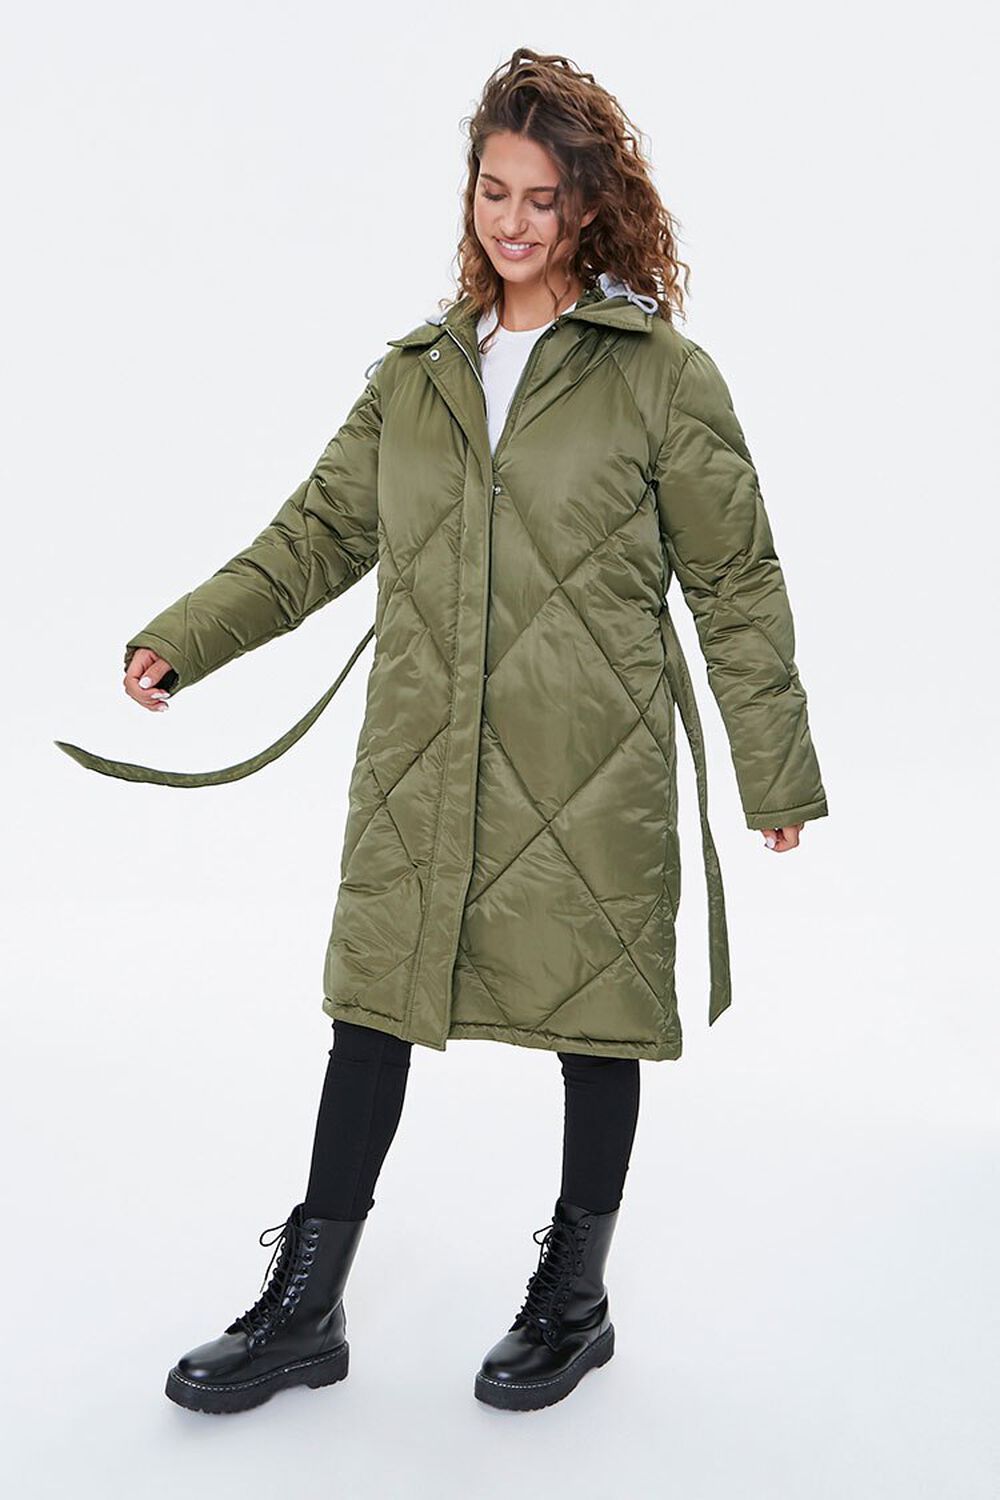 OLIVE/HEATHER GREY Longline Quilted Puffer Jacket, image 2